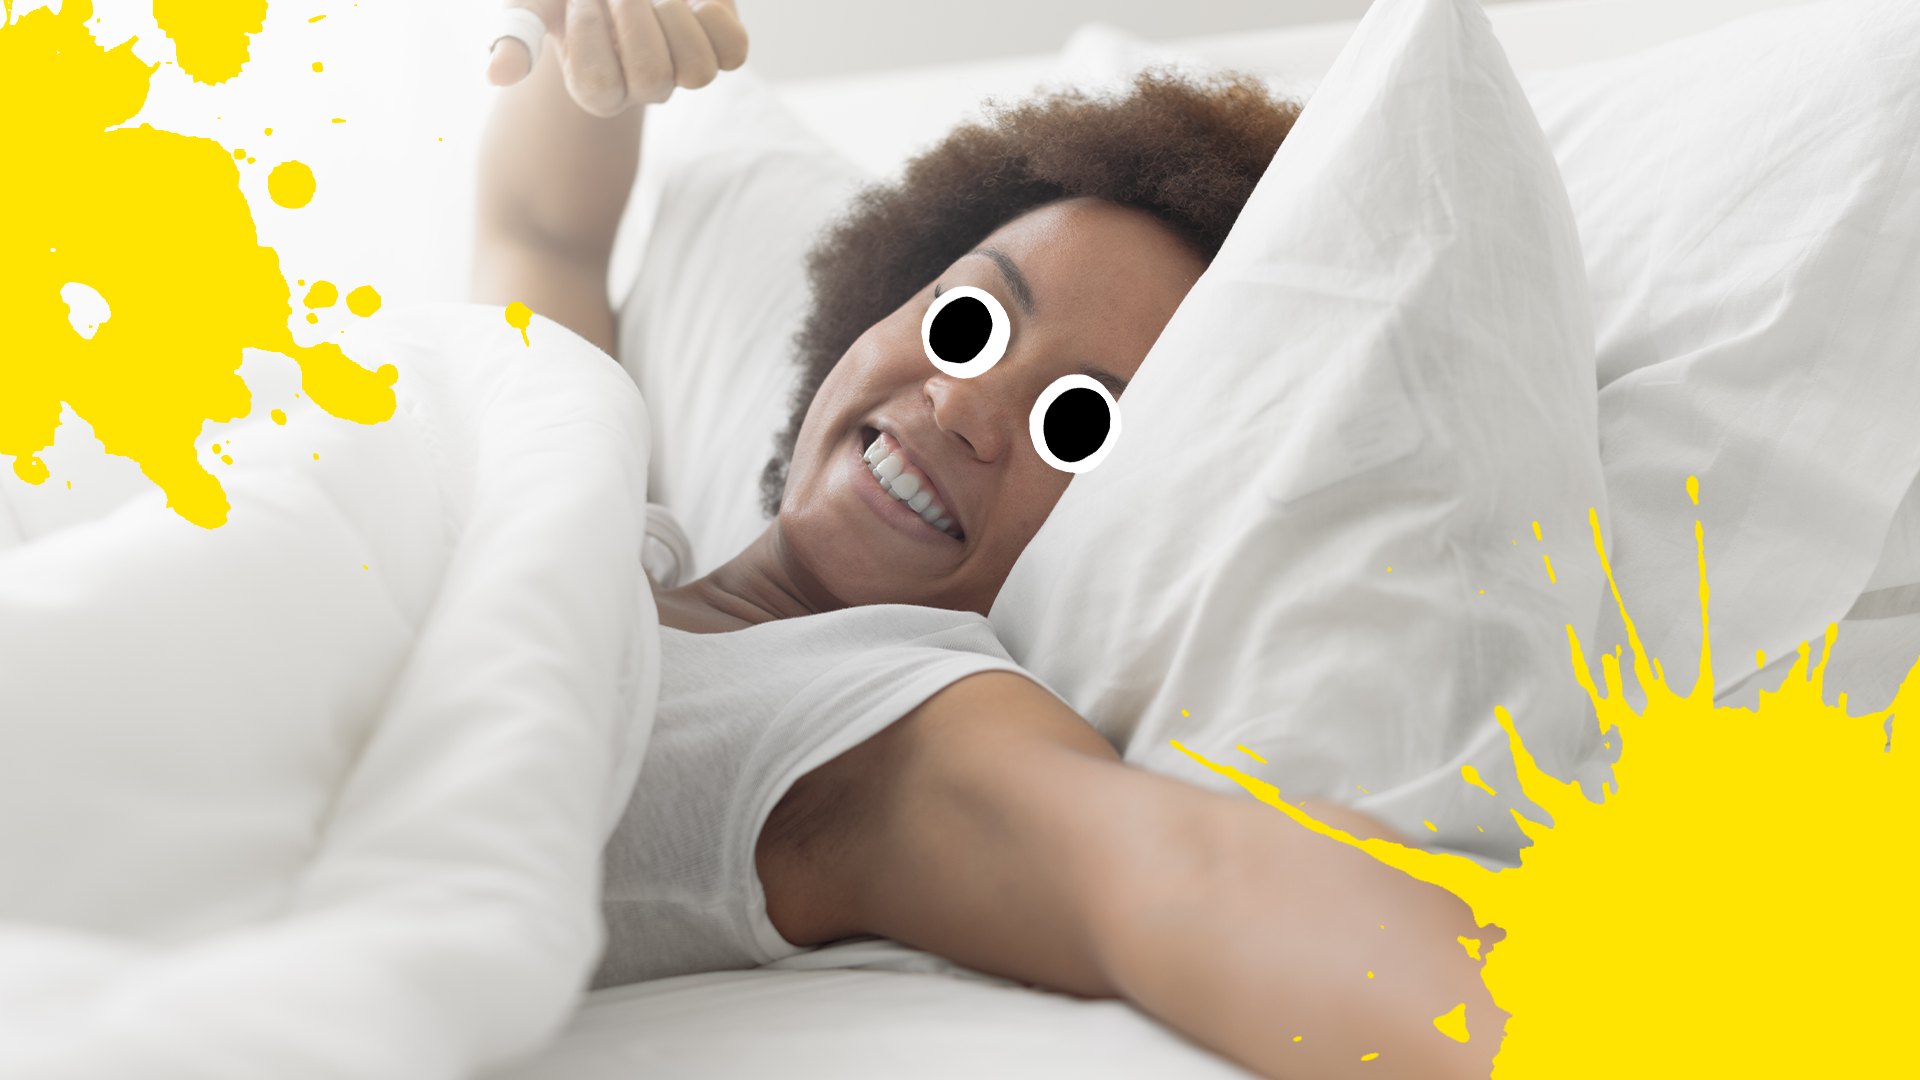 Woman in bed stretching and yellow splats